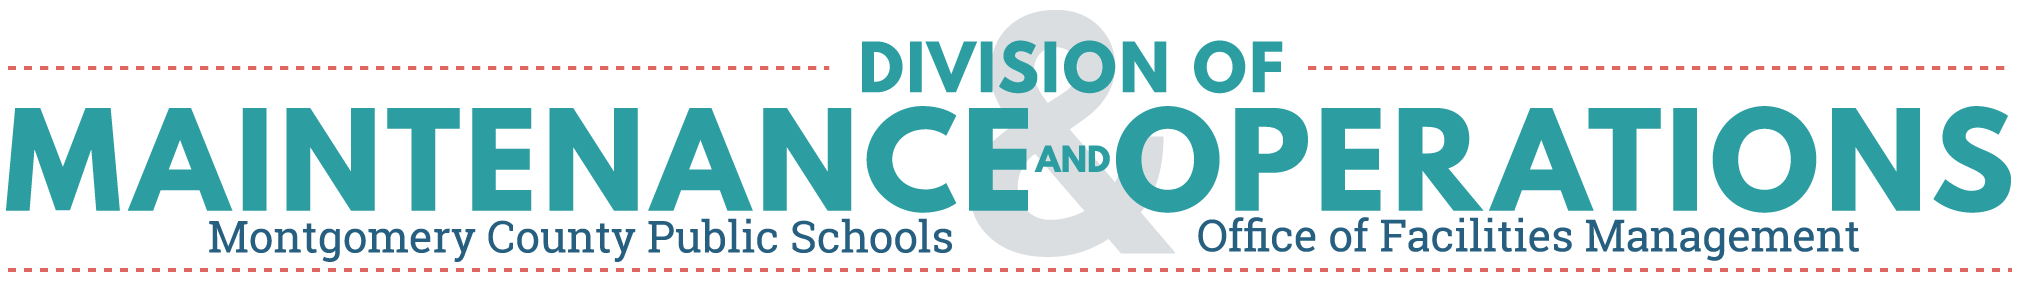 WORDS: Division of Maintenance and Operations, Montgomery County Public Schools, Office of Facilities Management